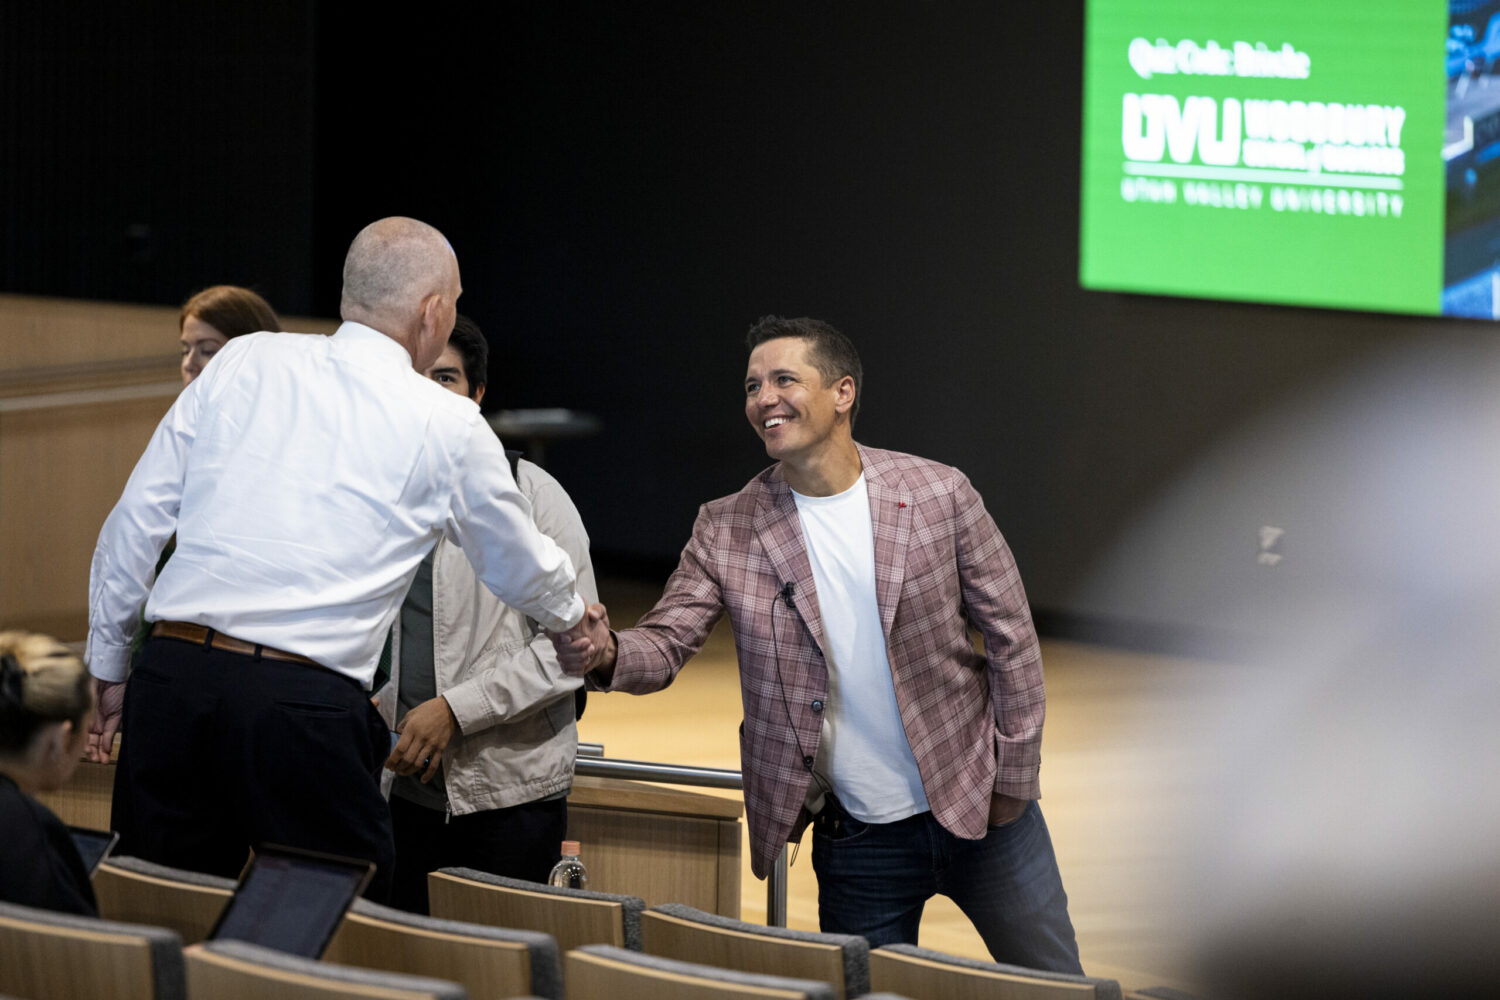 Mike presenting to UVU Students during the Reed and Christine Halladay Executive Lecture Series. | Photo by Isaac Hale